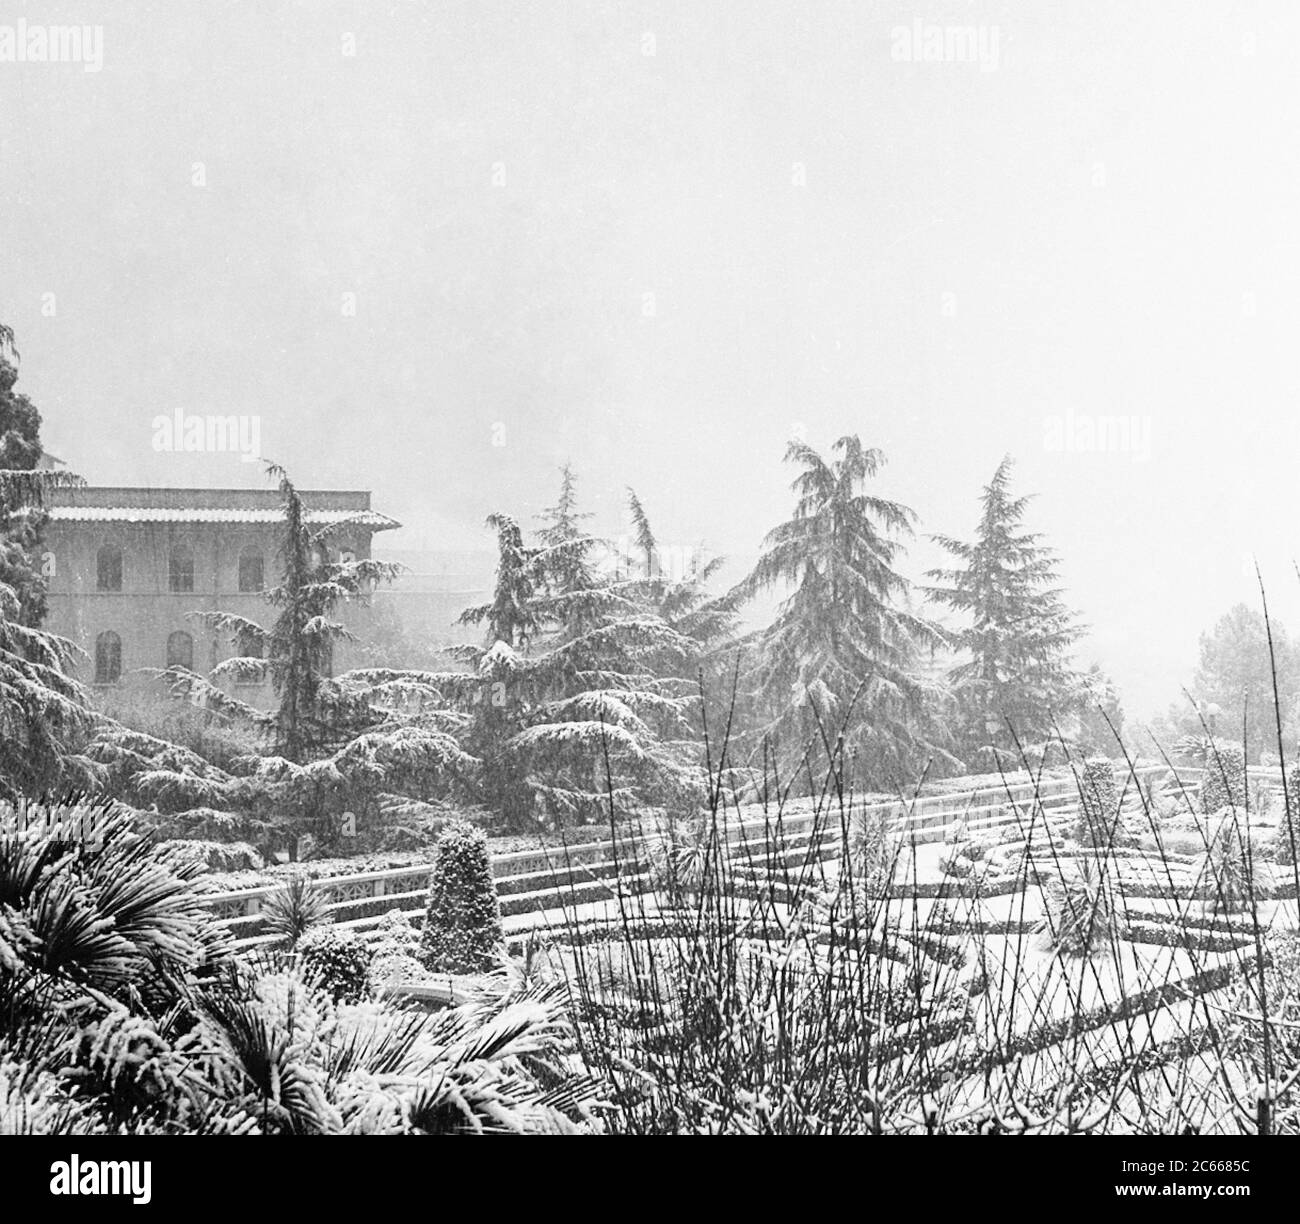 Vatican City The snowfall of February 2, 1956 in the Vatican during the pontificate of Pius XII - Vatican Garden Stock Photo